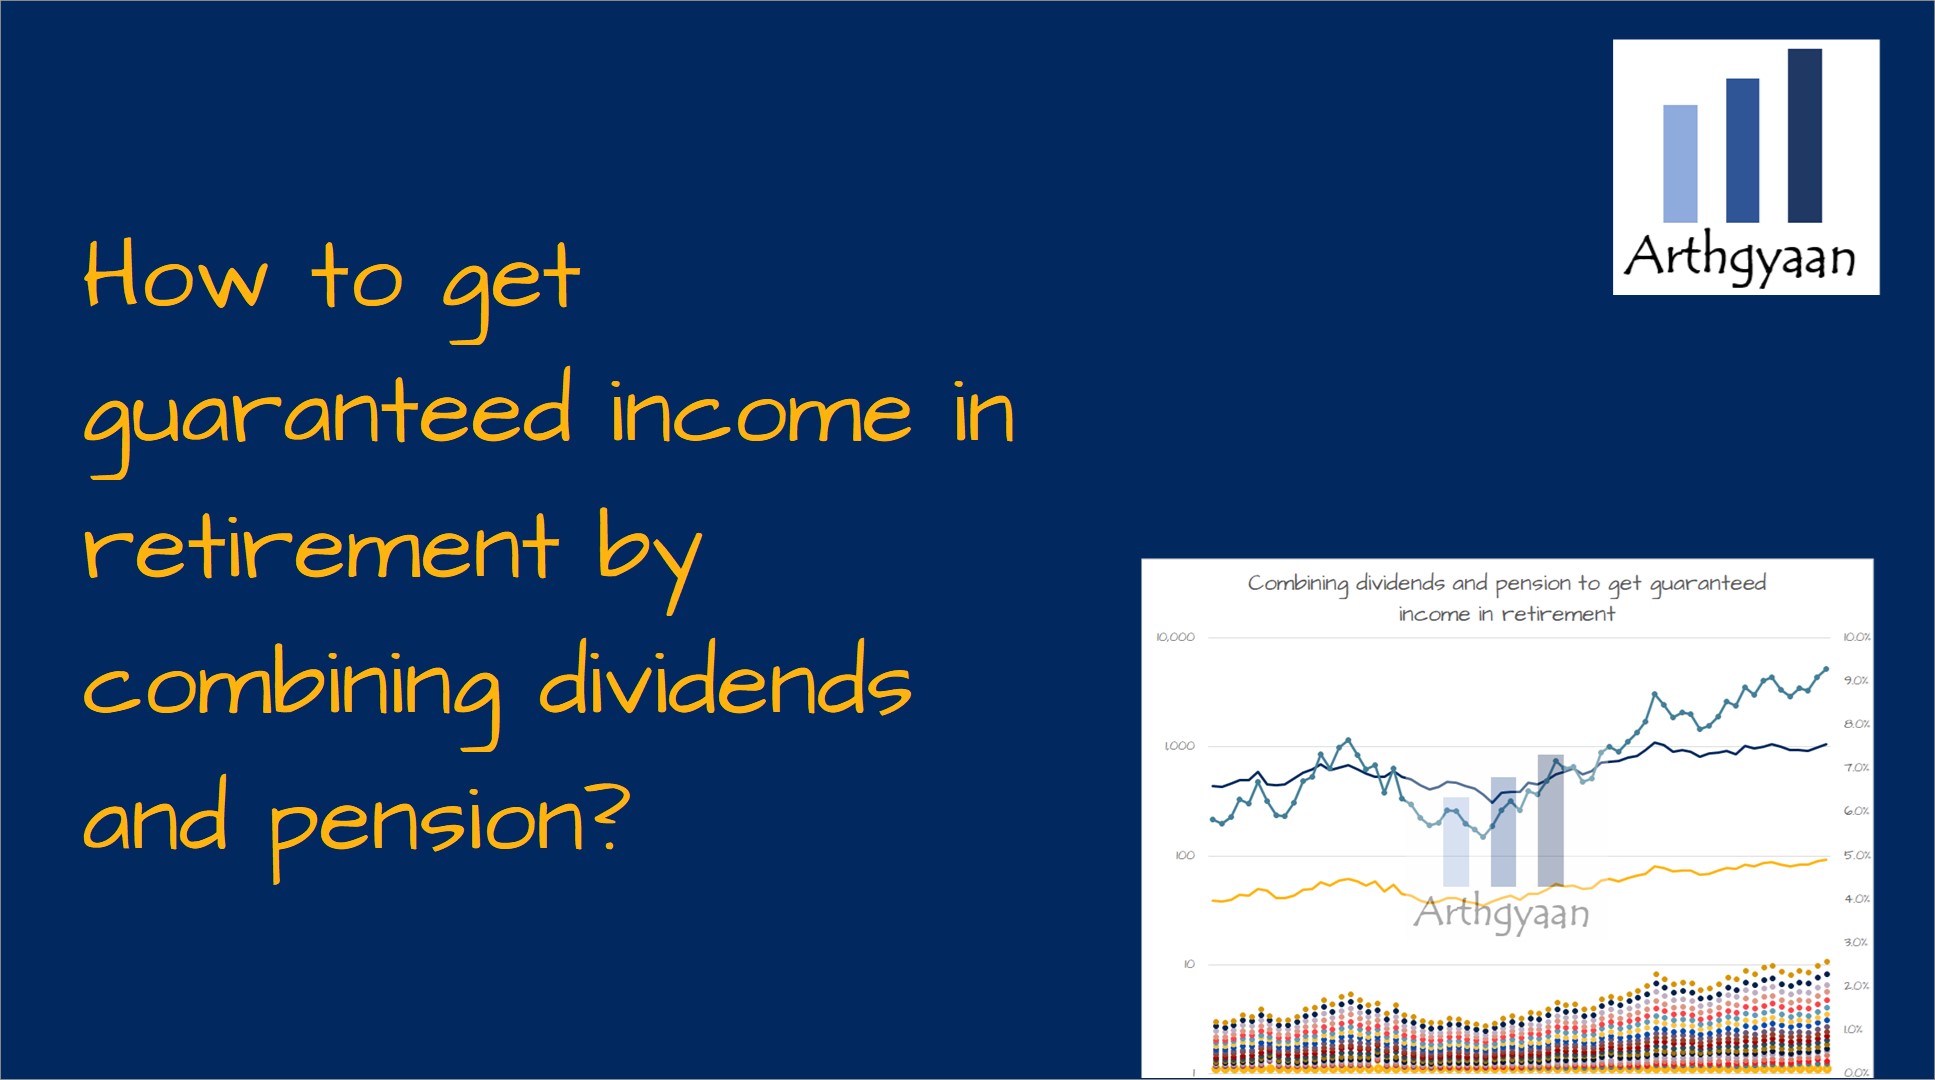 How to get guaranteed income in retirement by combining dividends and pension?